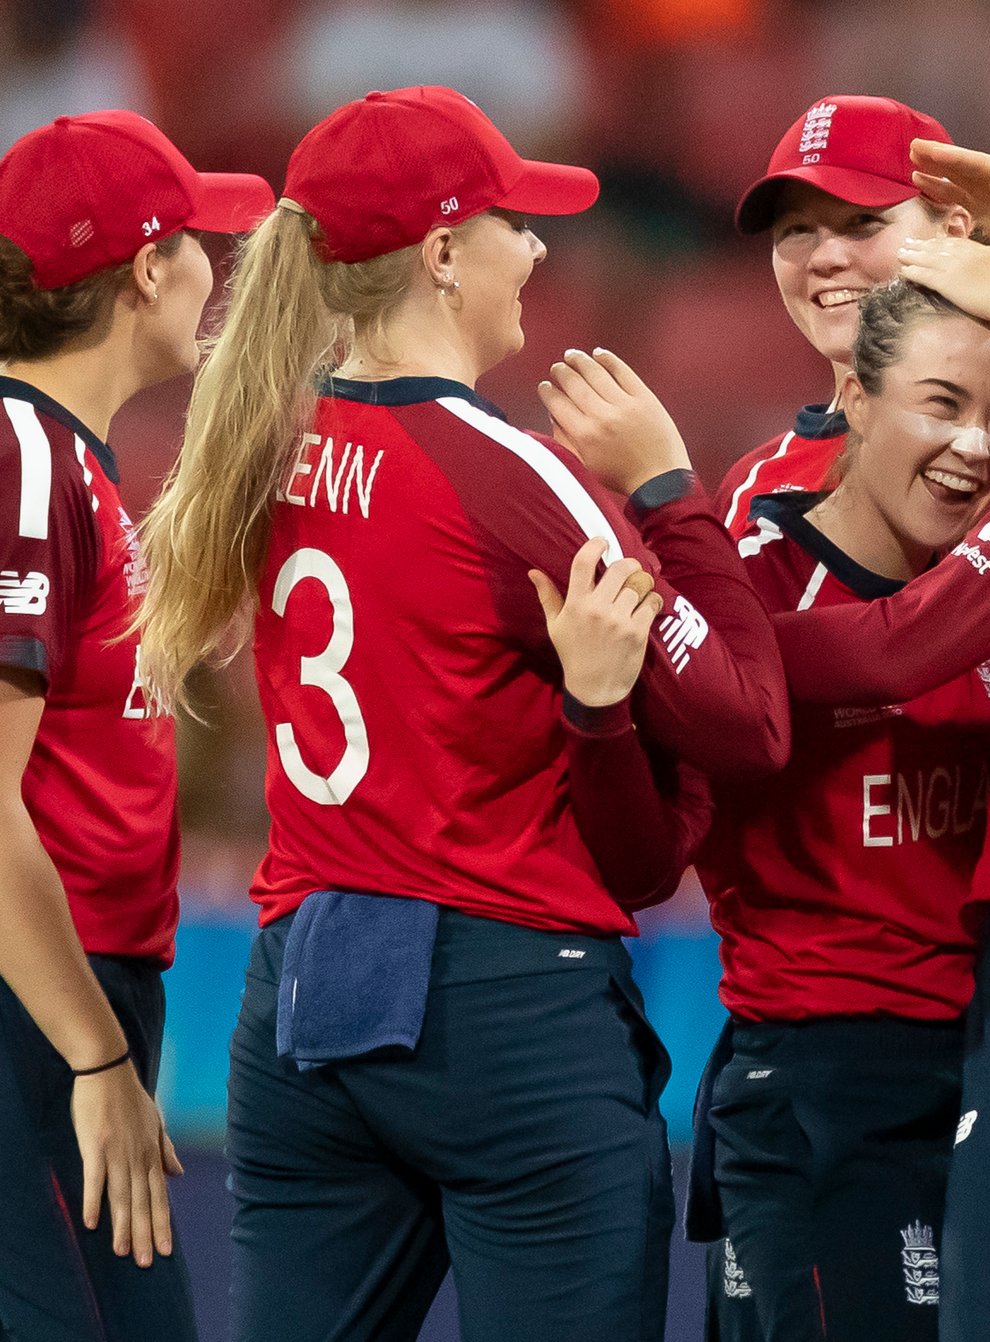 England Women last played at the World T20 in Australia in early March